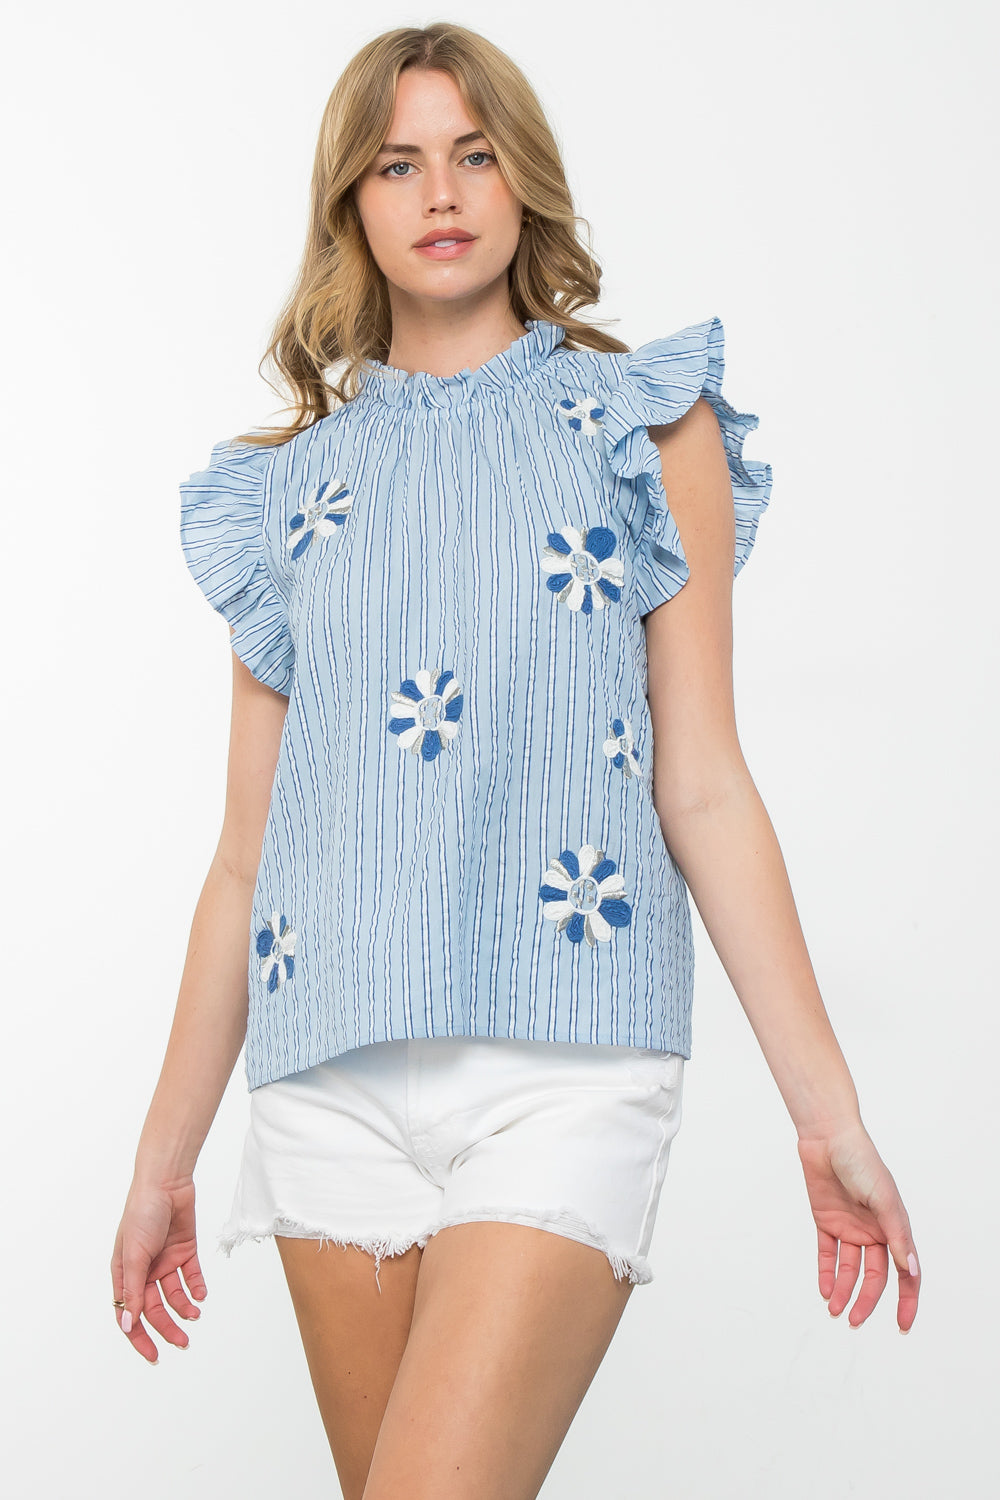 Fran Blue and White Stripe ruffle Sleeve top with Embroidered Flowers